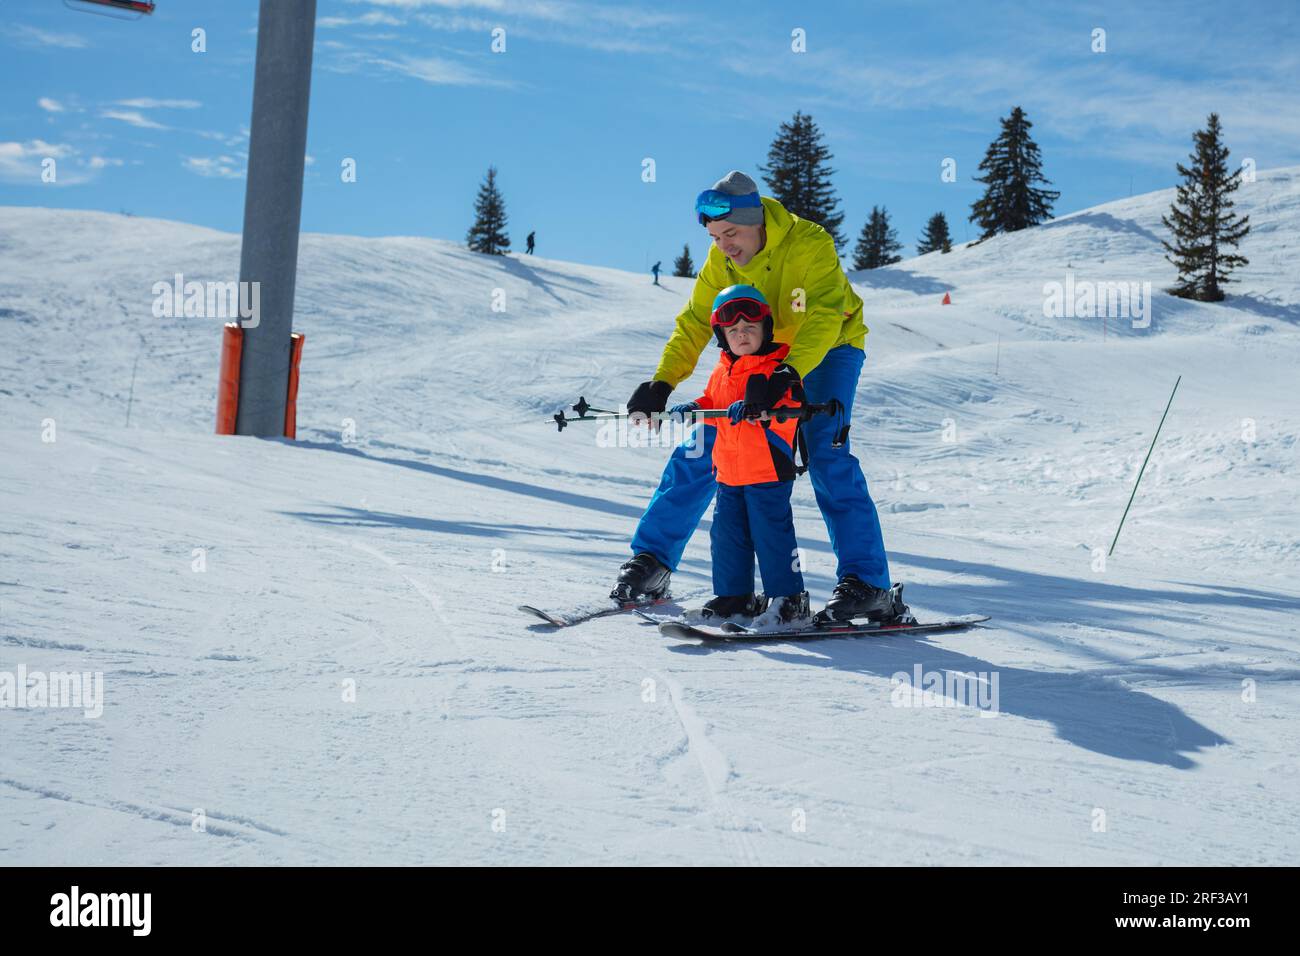 Adult teaches kid gliding behind holding ski poles together Stock Photo